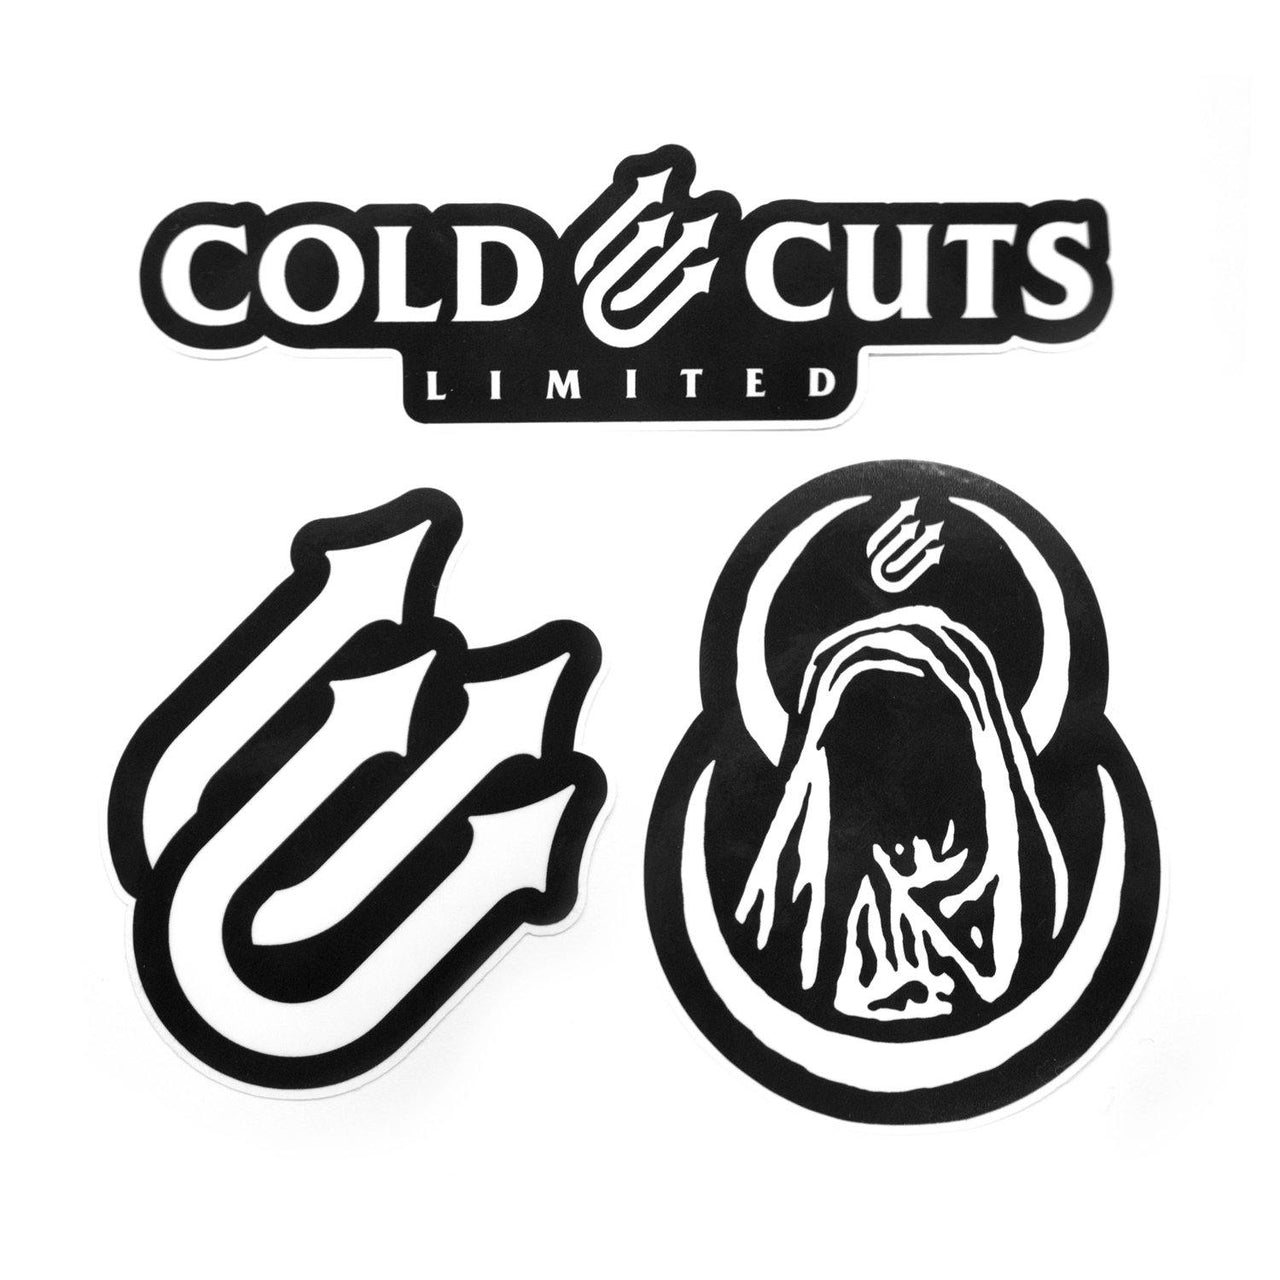 Buy – Cold Cuts Limited "CCL" Sticker Pack – Band & Music Merch – Cold Cuts Merch